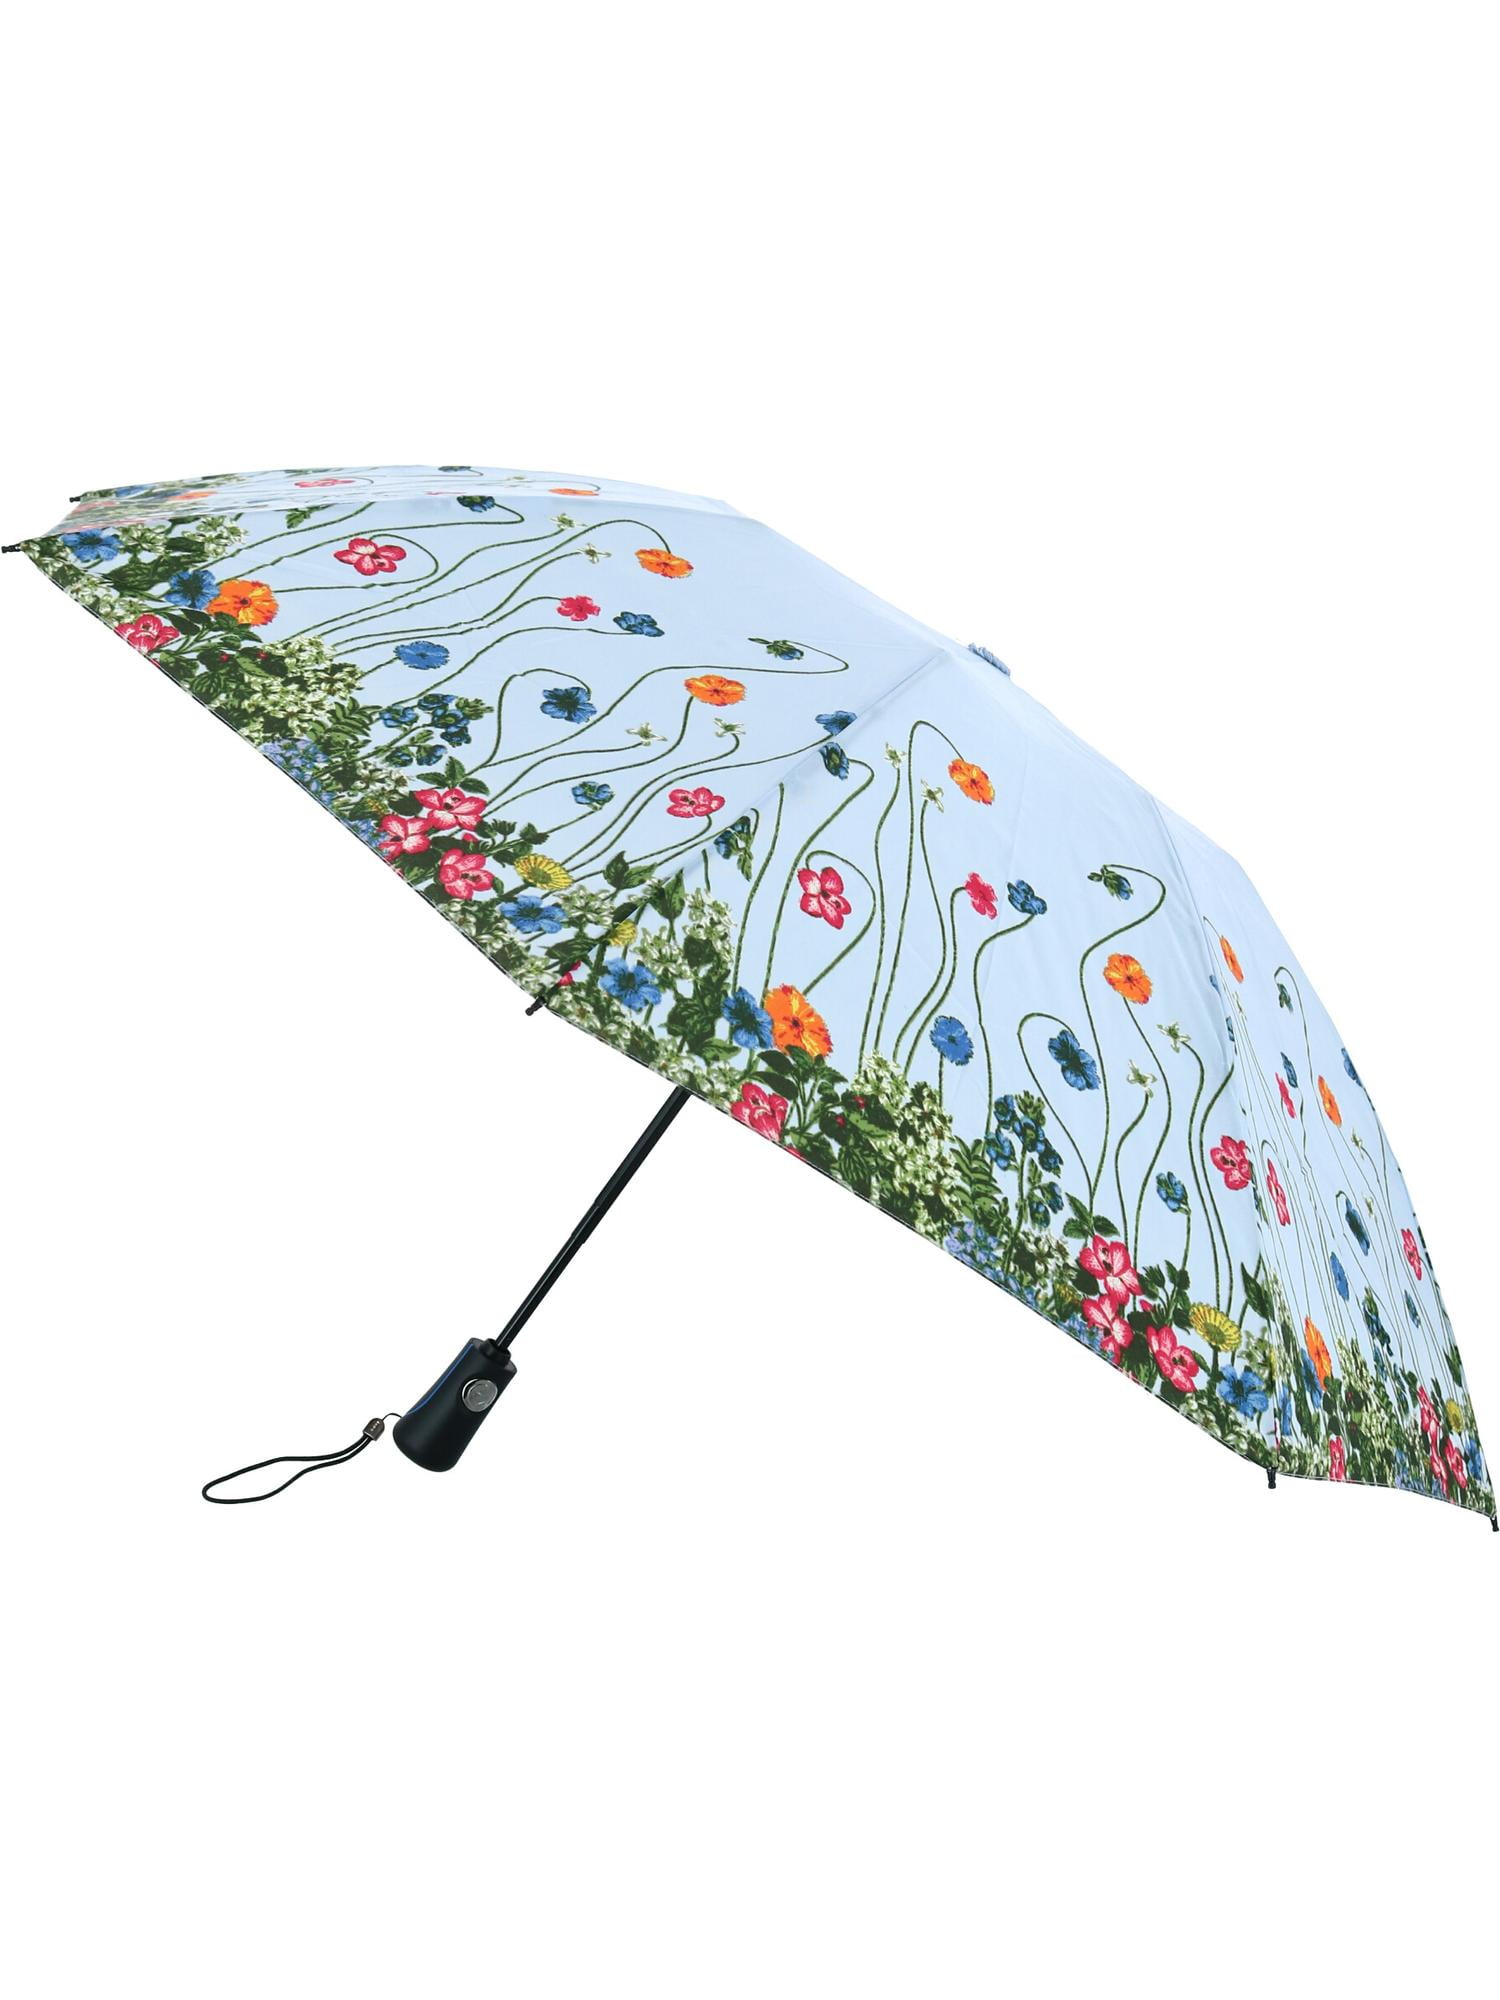 Funny Barn Hair Dont Care Automatic Open Folding Compact Travel Umbrellas For Women 